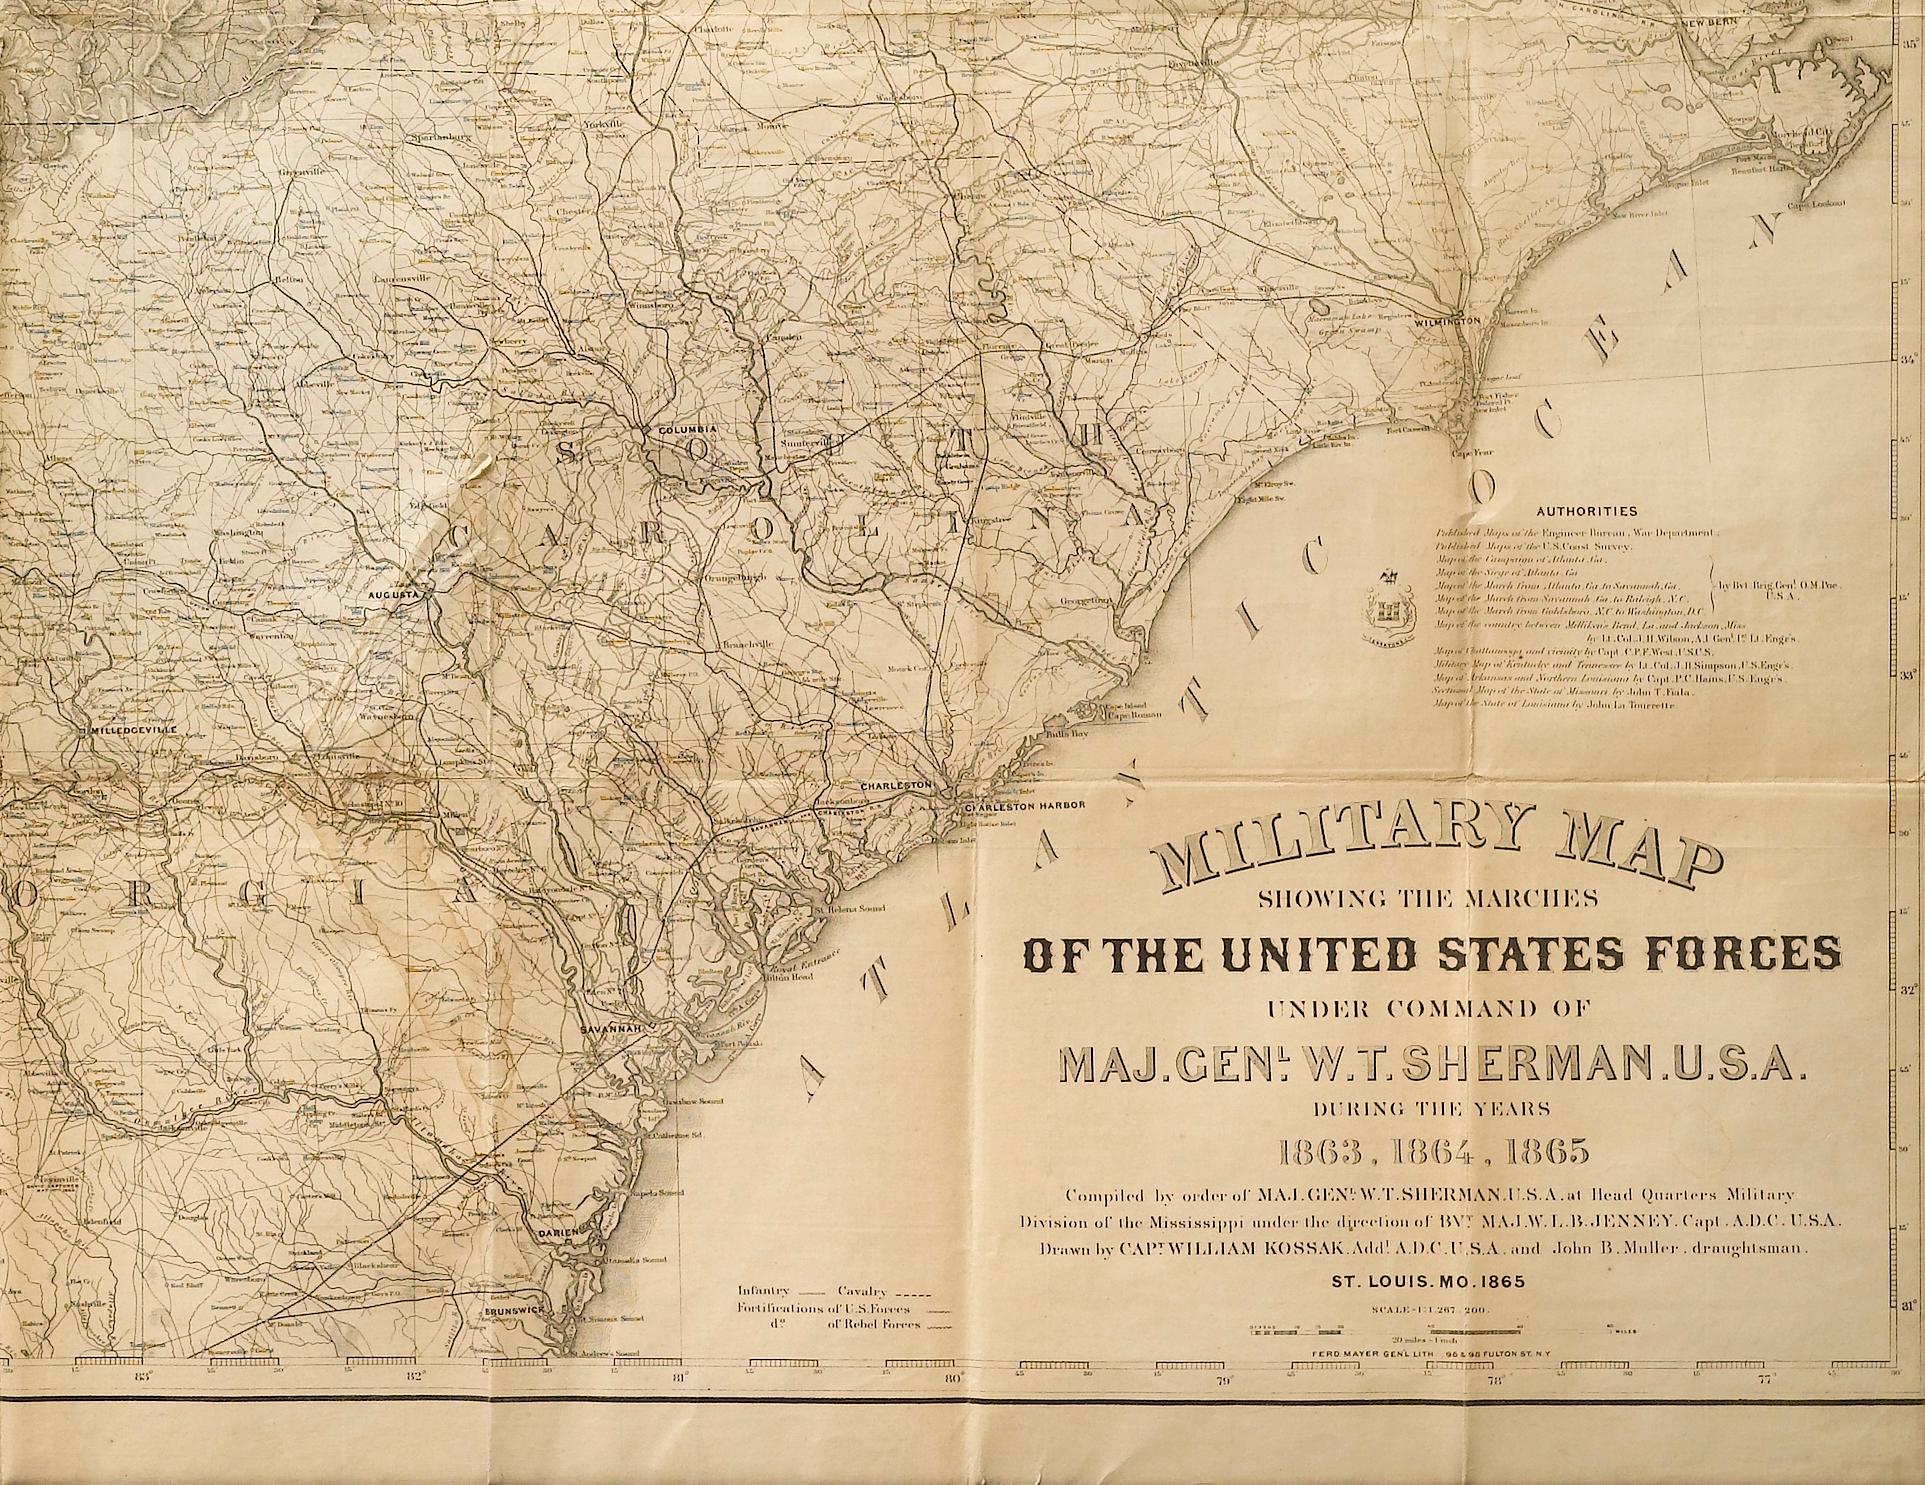 This is an 1865 issue of “Military Map Showing the Marches of the United States Forces under the Command of Maj. Gen. W.T. Sherman” which covers the years of 1863, 1864, and1865. Engraved at Head Qrs., Corps of Engineers, by H. C. Evans & F.